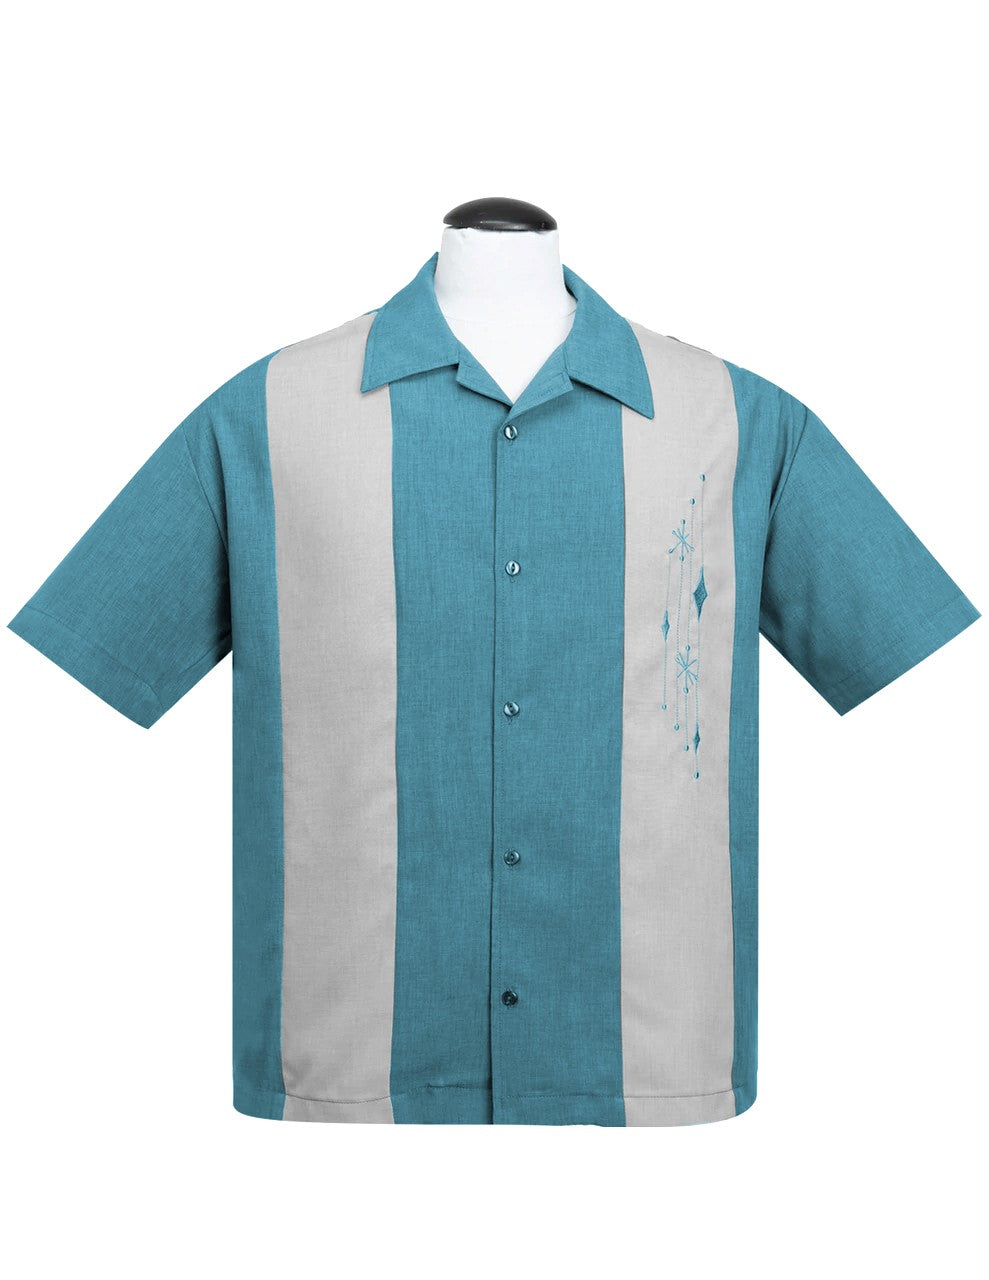 Mid Century Marvel Bowling Shirt in Pacific/Silver